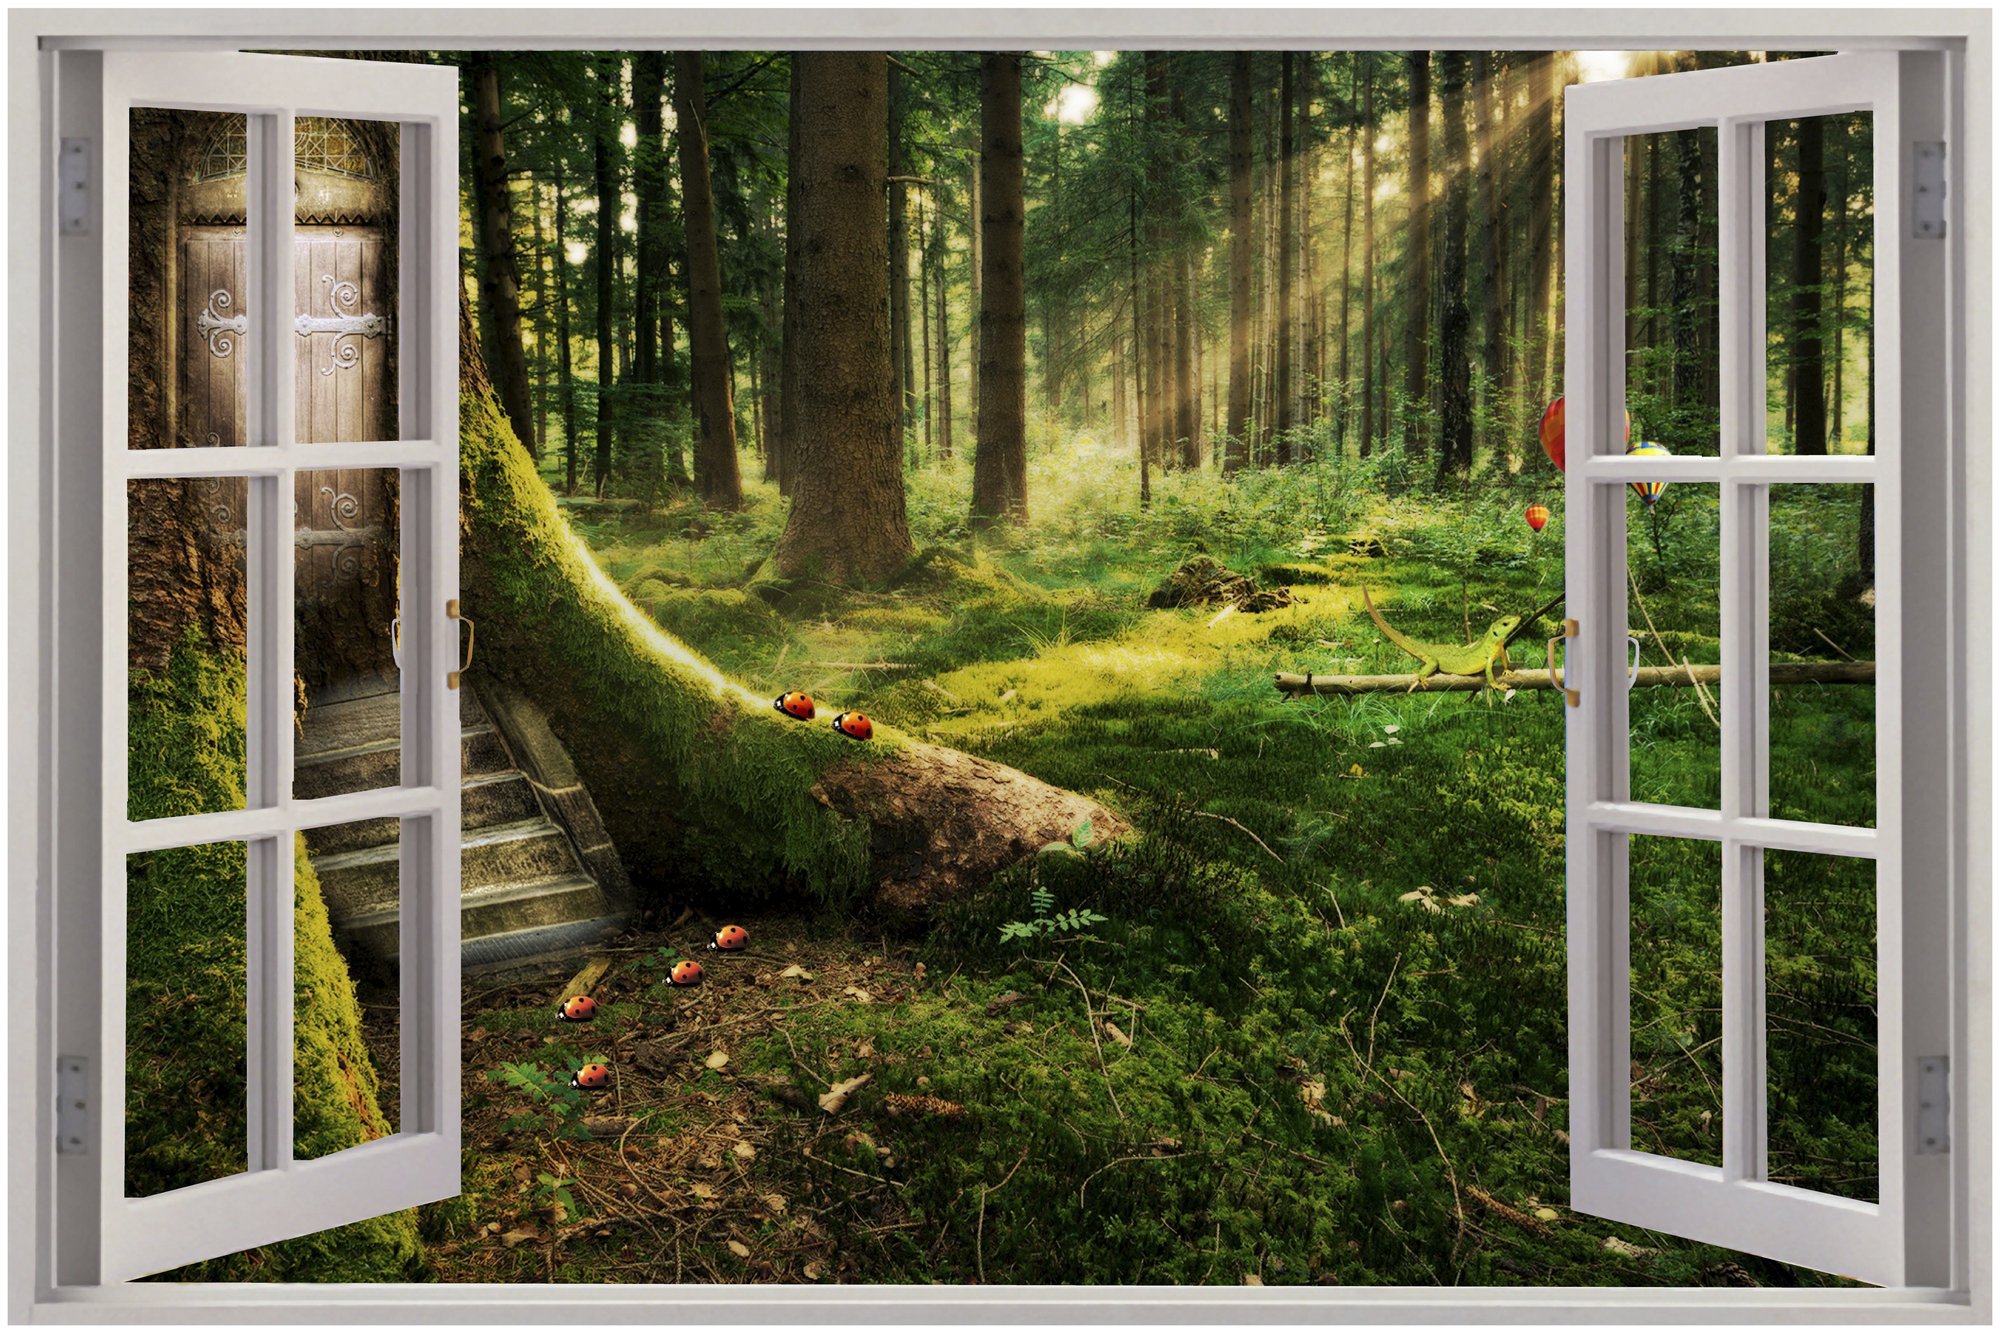 Details About Huge 3d Window Enchanted Forest Wall Stickers Mural